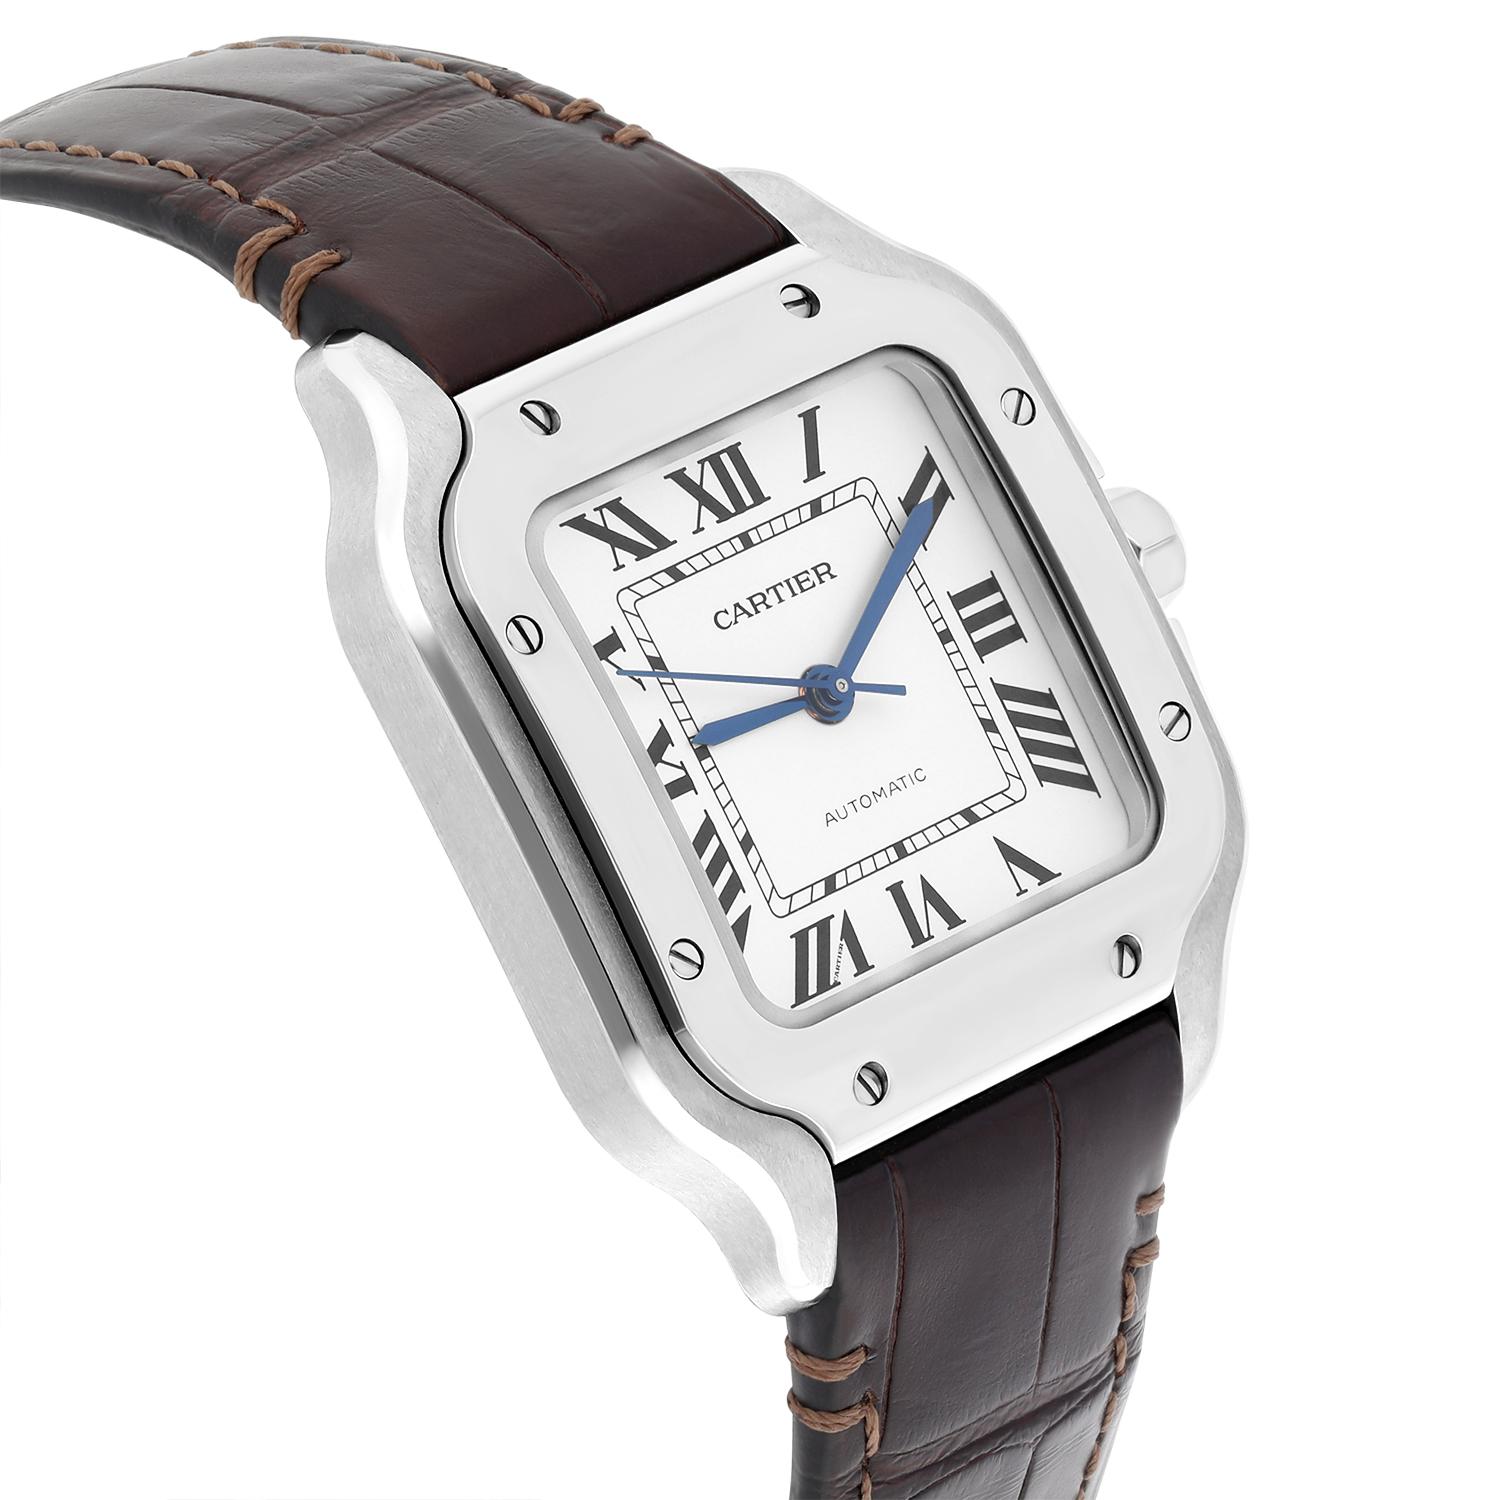 Cartier Santos WSSA0029 Medium Size Stainless Steel Watch Leather Band In Excellent Condition For Sale In New York, NY